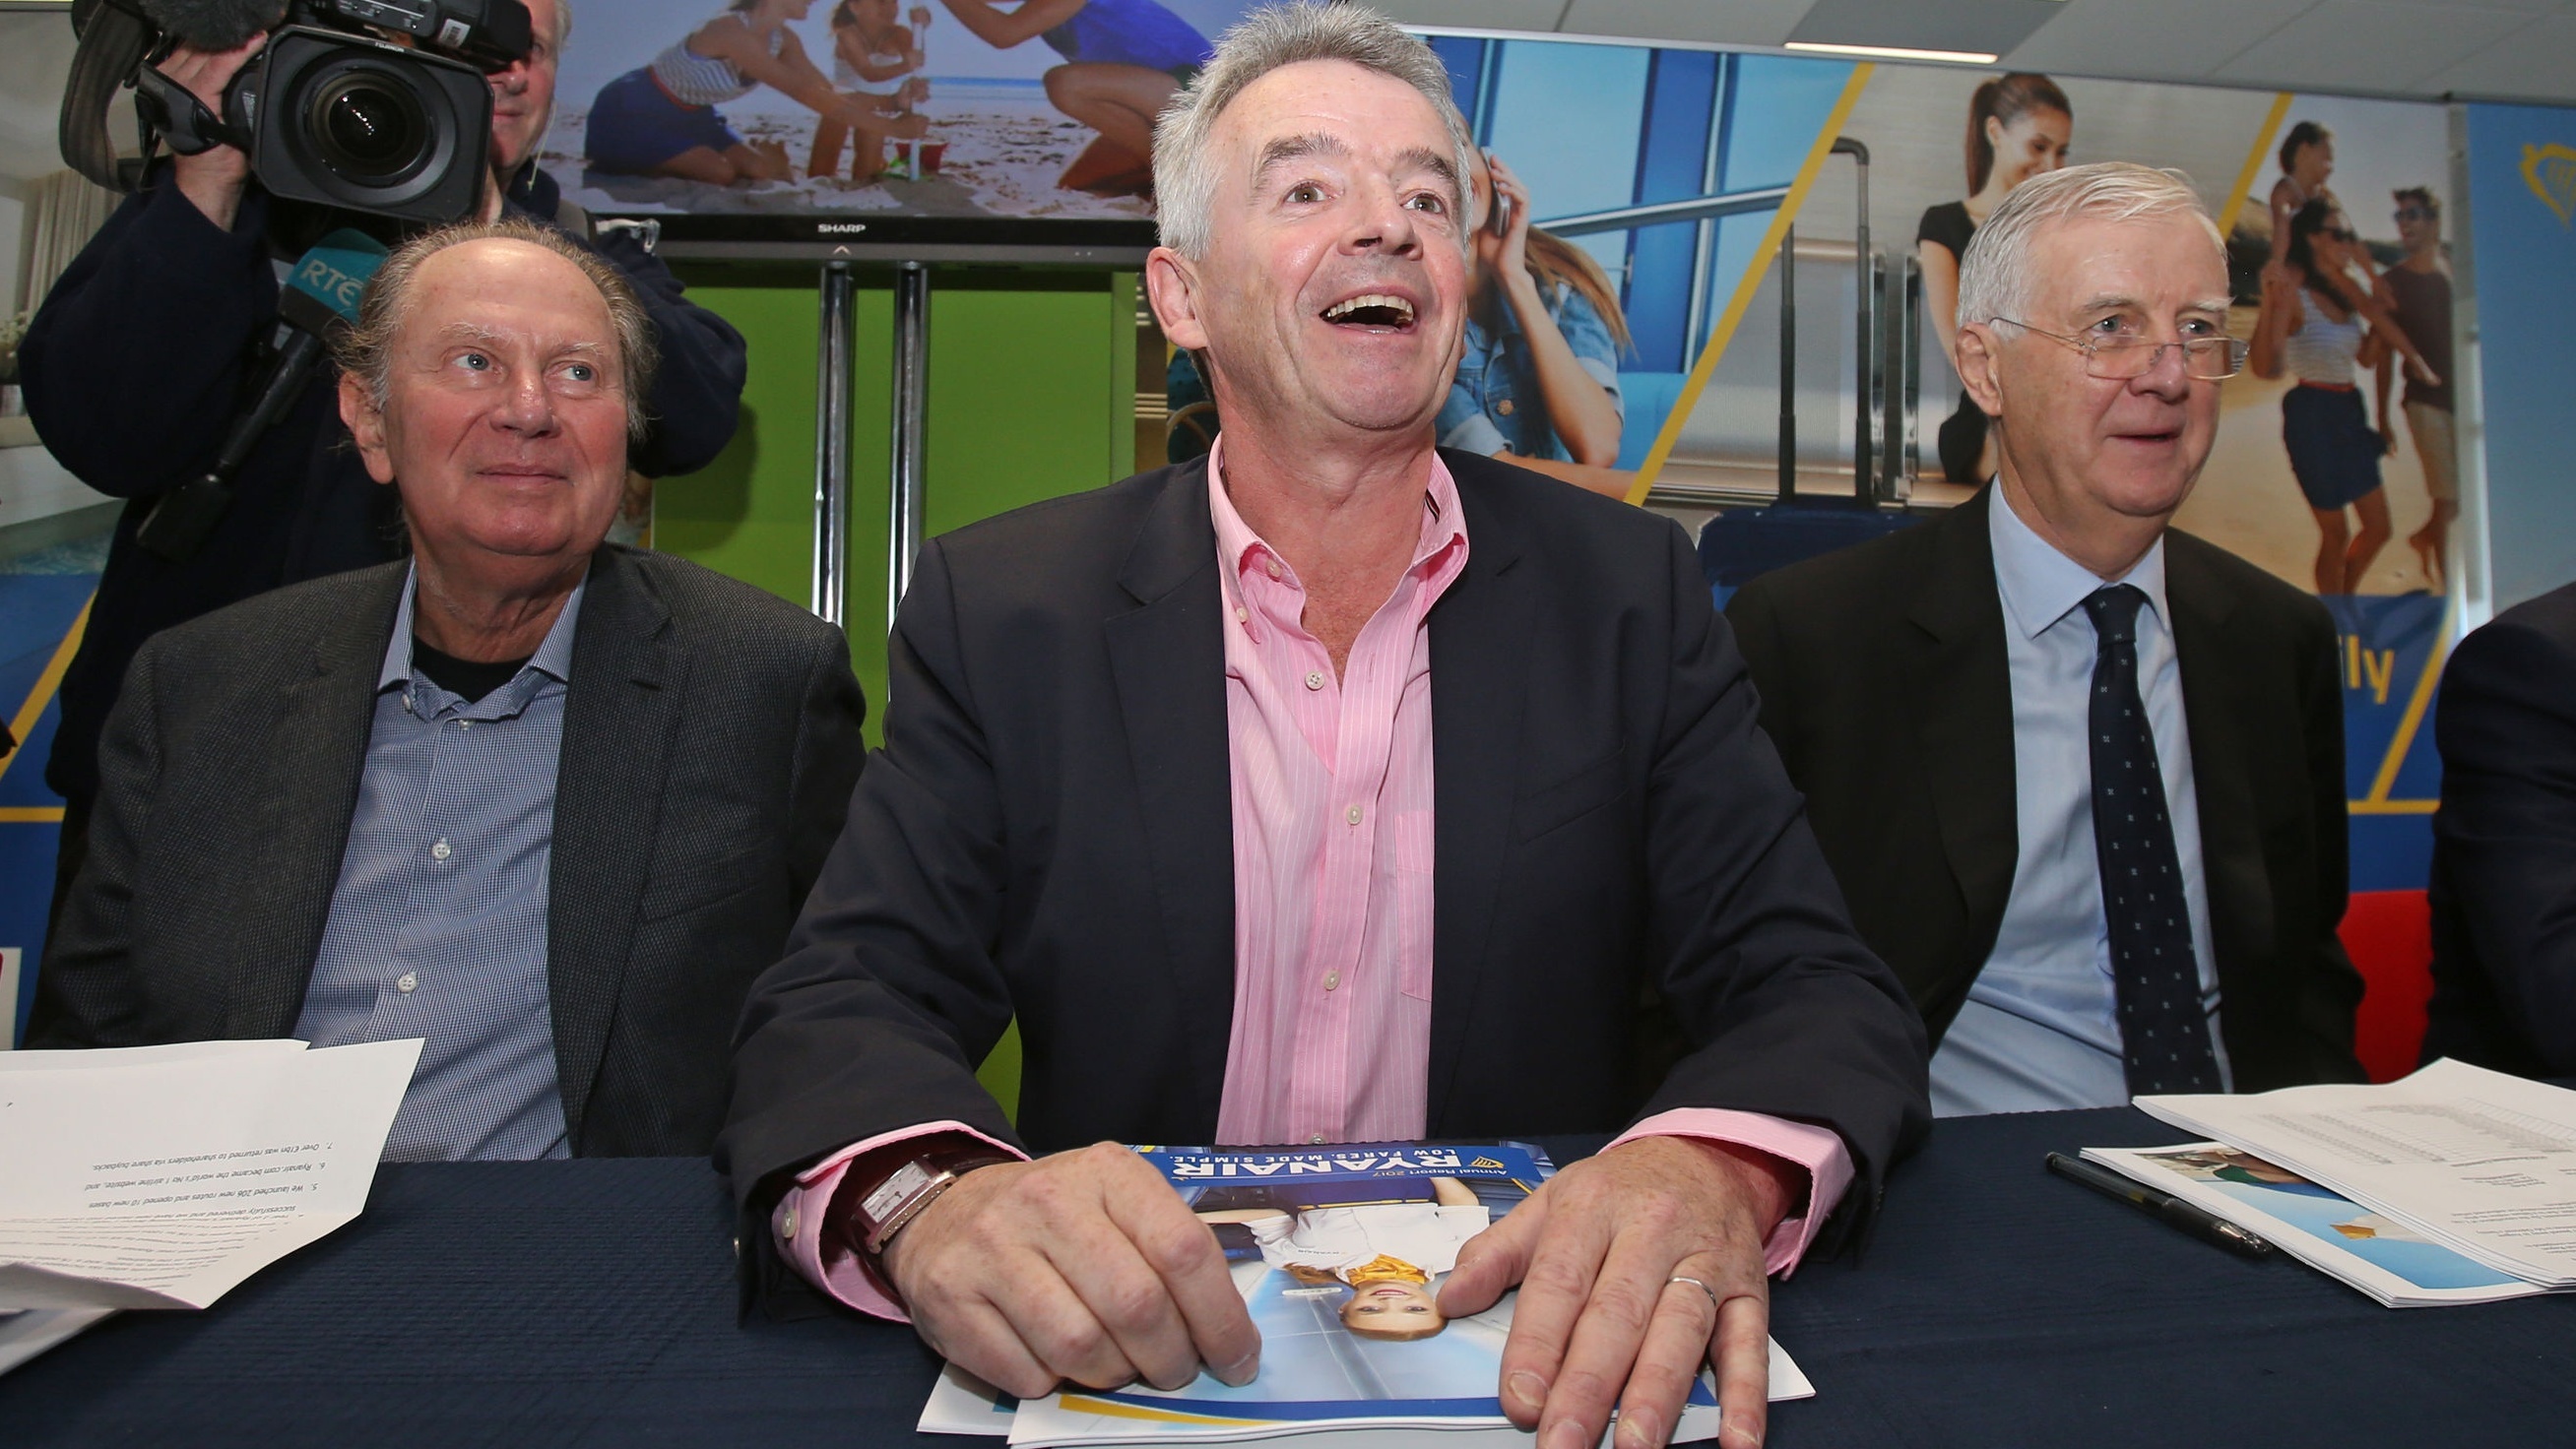 Ryanair chief executive Michael O'Leary, centre, with Director David Bonderman, CEO directors Kyran McLaughlin, left, and Howard Millar during the company's AGM at the their Dublin headquarters (Niall Carson/PA)